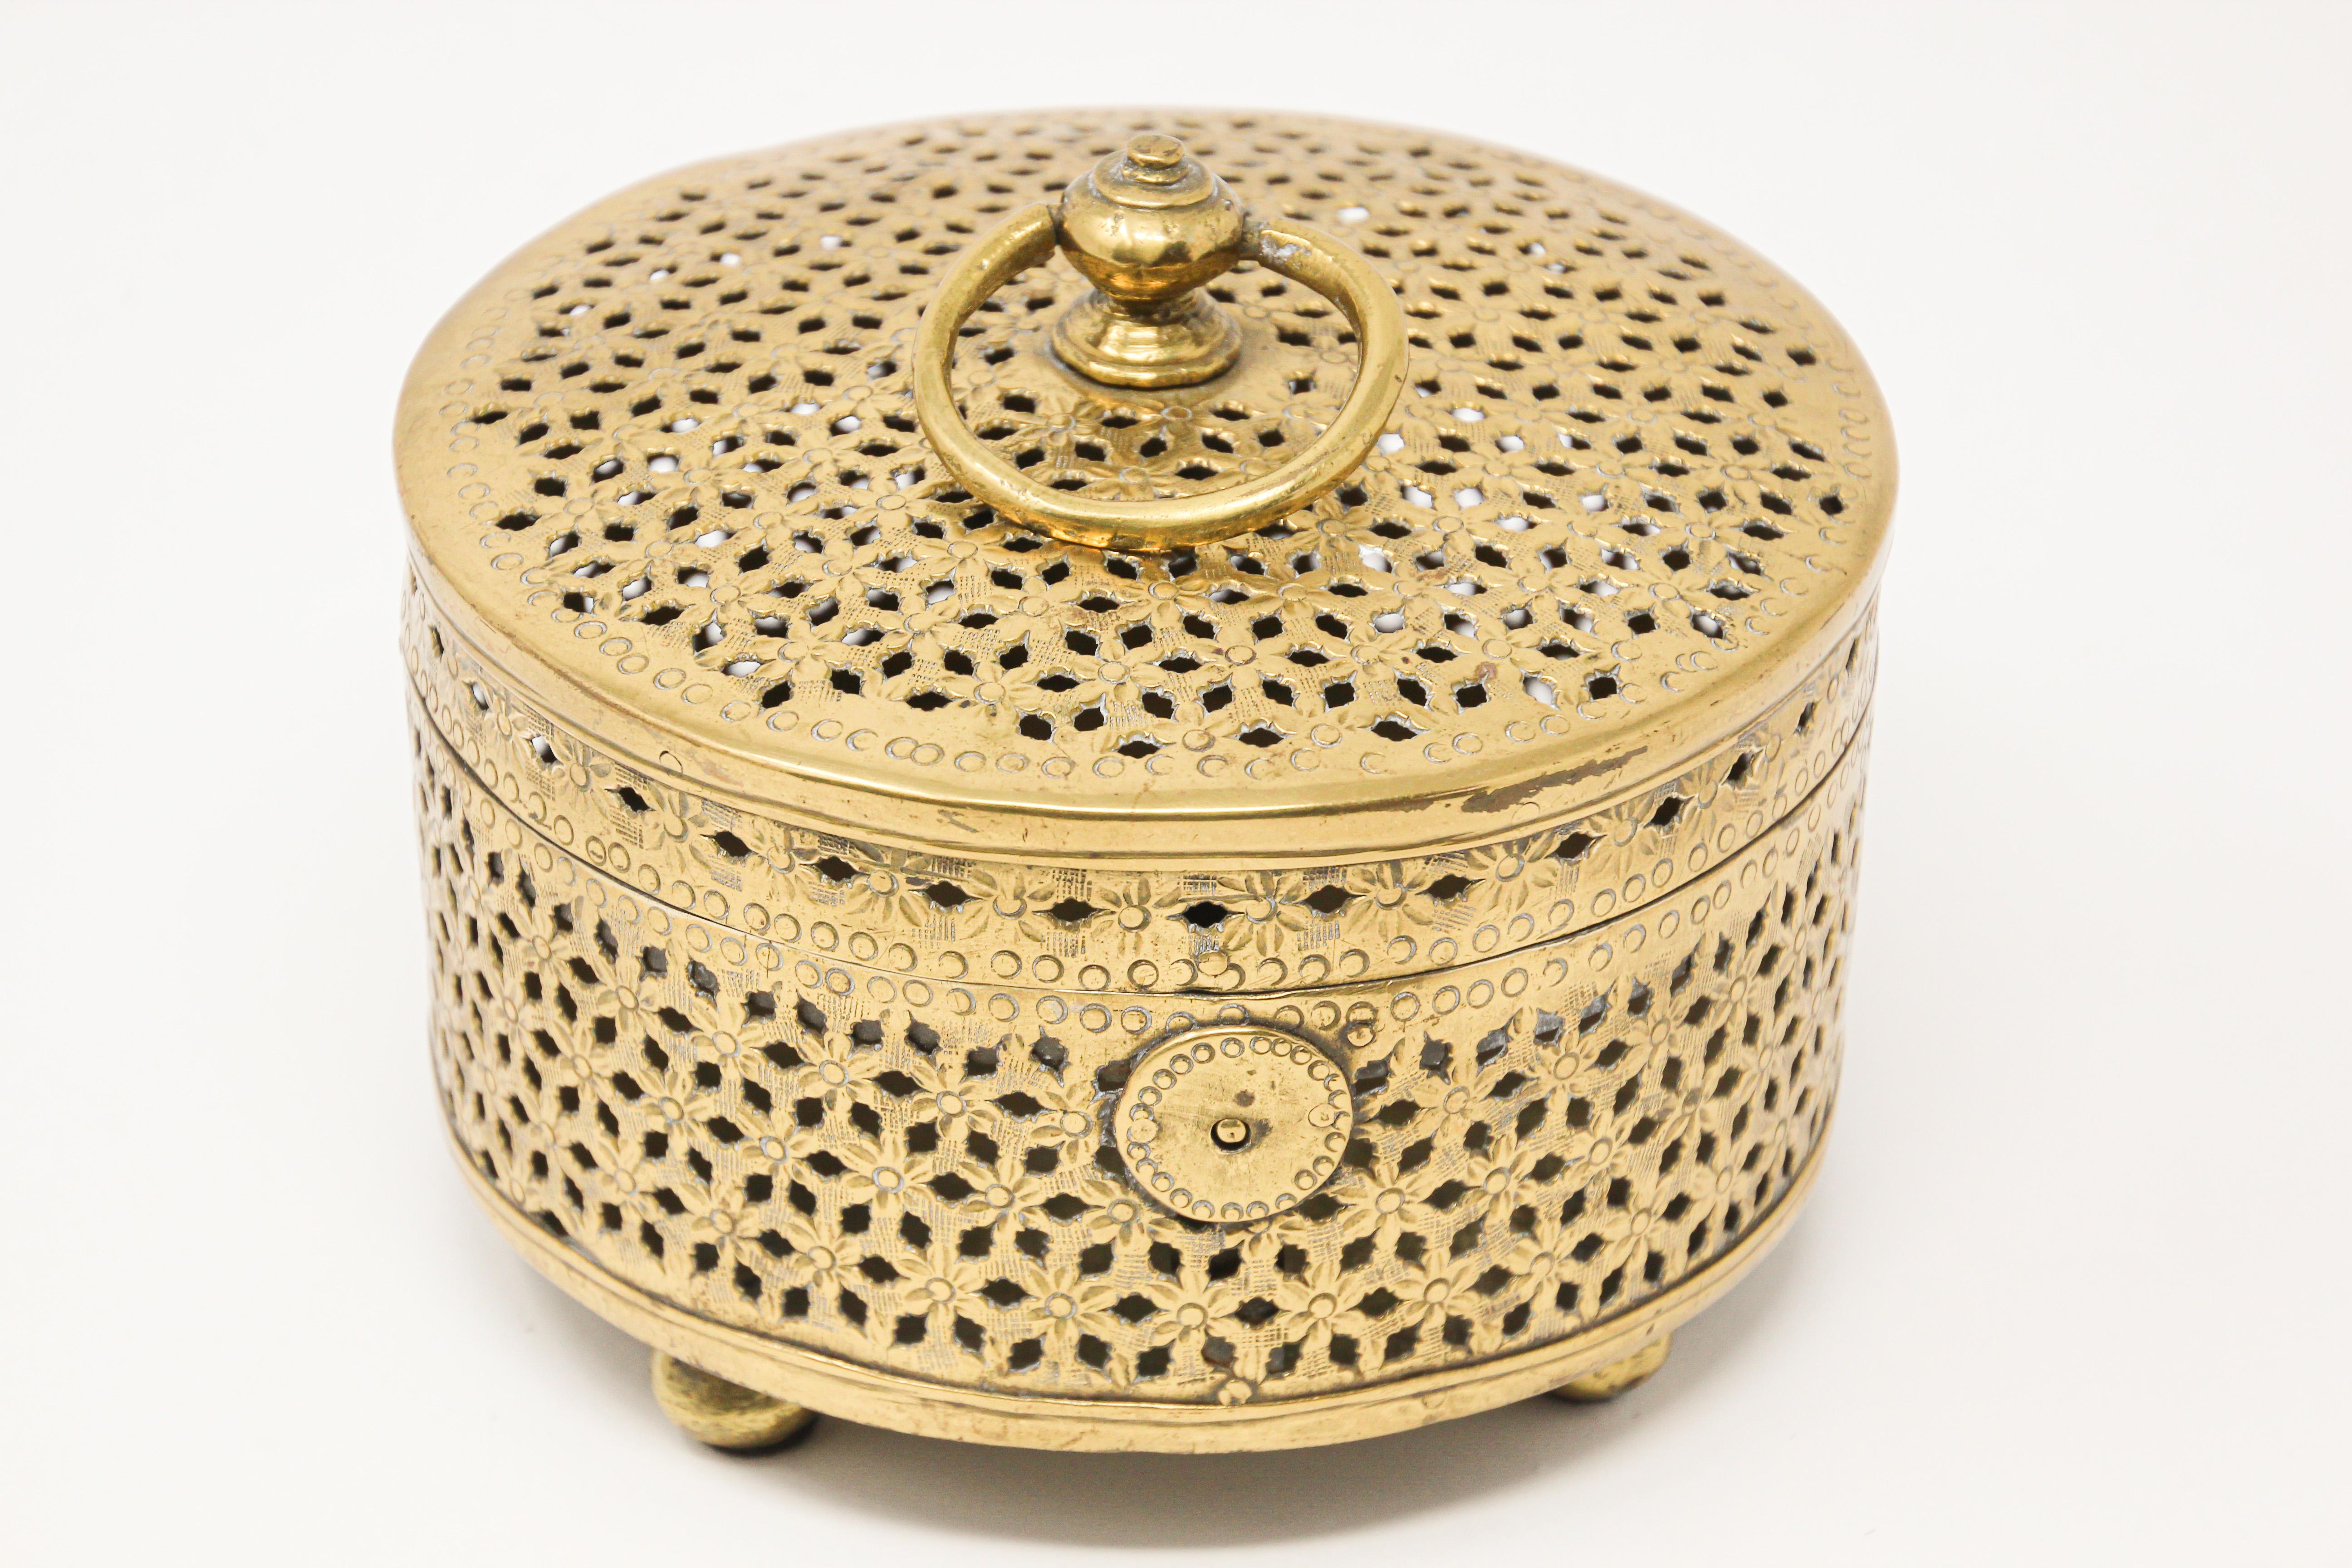 Handcrafted large Mughal style decorative round exquisite Incense holder polished brass box with lid, latch and handle delicately and intricately hand-hammered with floral, geometric designs.
This incense burner stands on four cast feet and has an